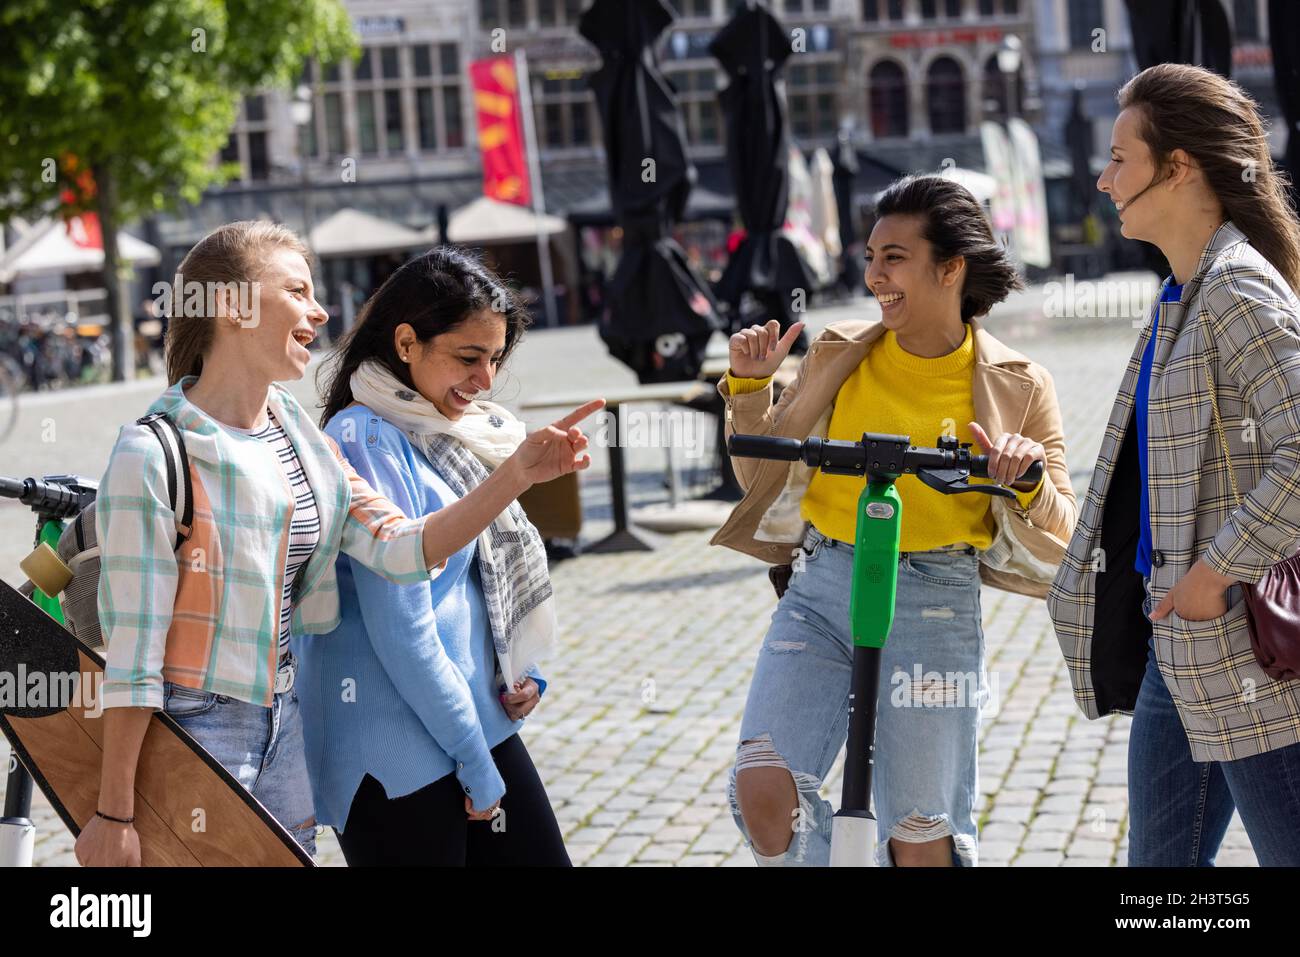 Lifestyle portrait of a diverse multiethnic group of four young girl friends on the electro scooter and skateboard having fun in Stock Photo